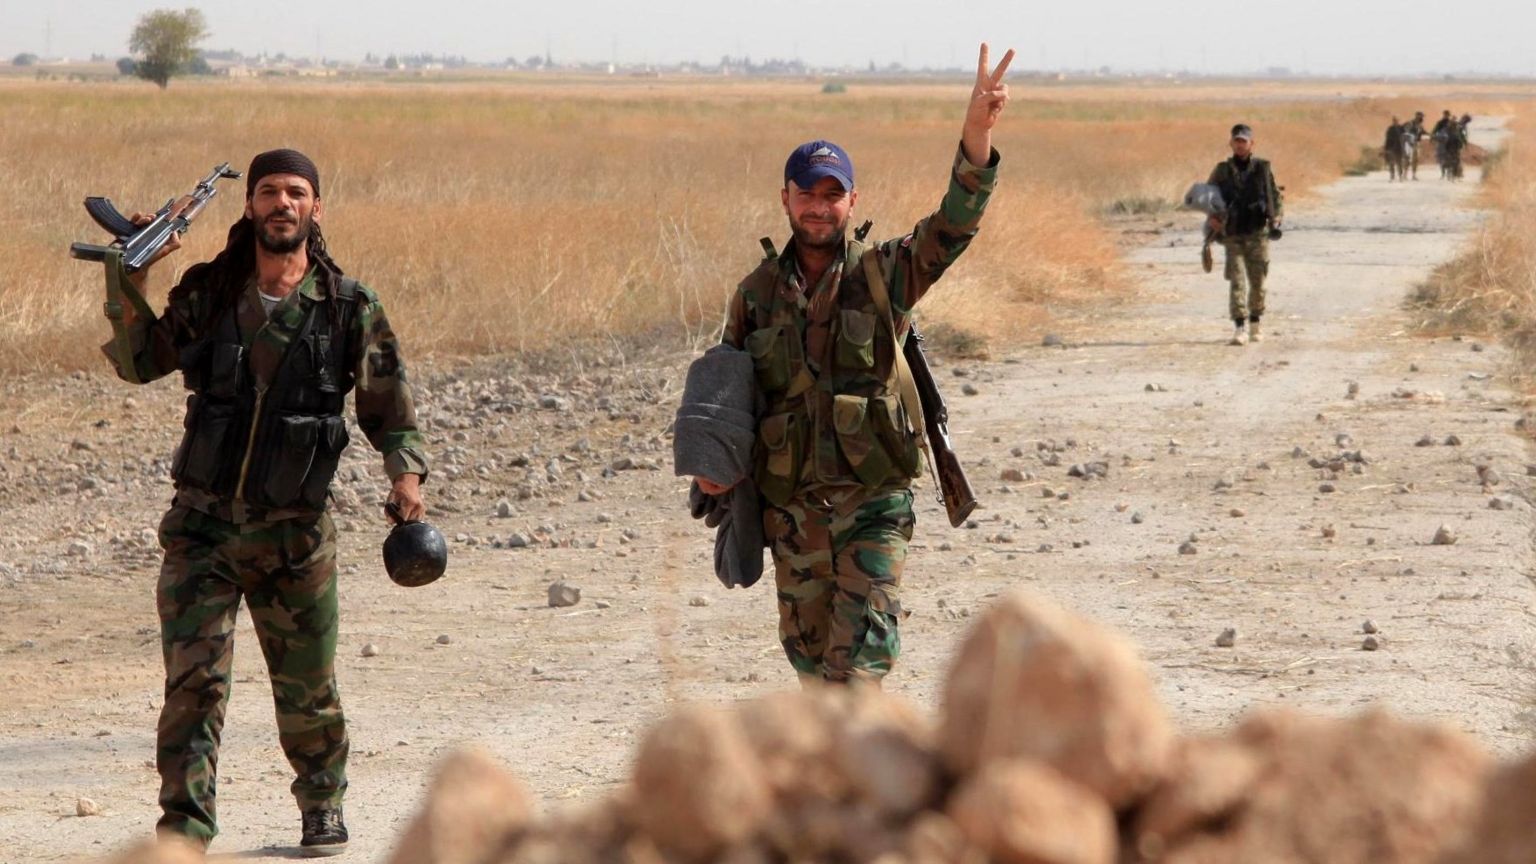 Syrian soldiers gesture as they walk down a road near Kweyris military airport, in Aleppo province (18 October 2015)